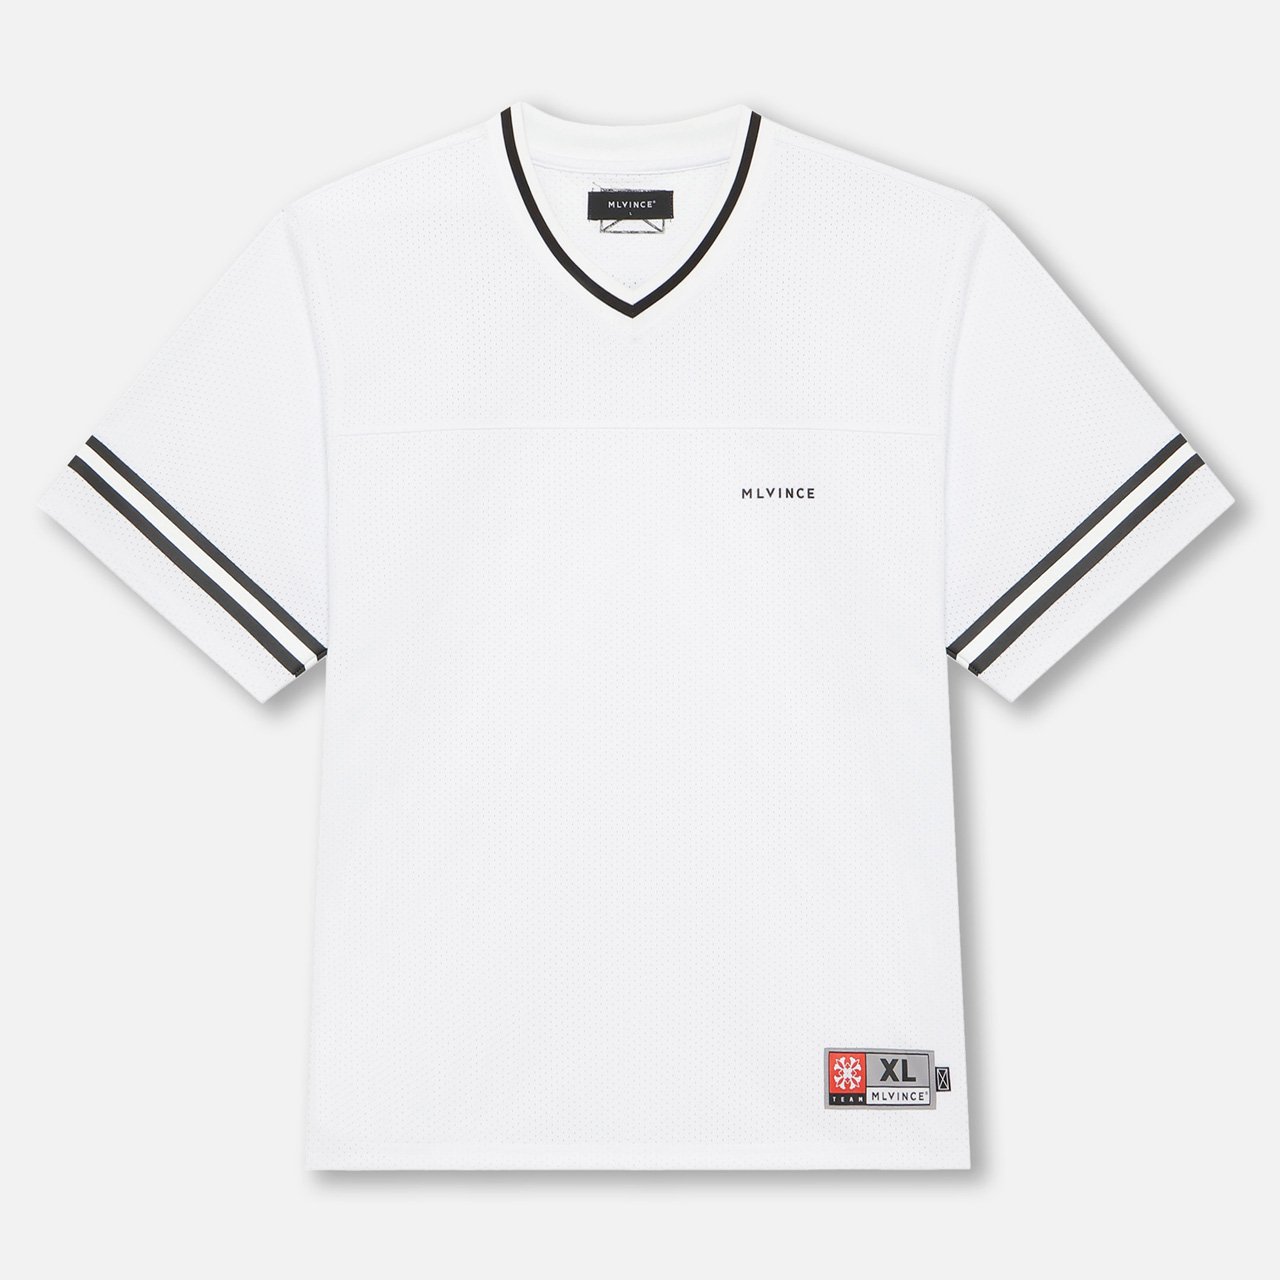 <img class='new_mark_img1' src='https://img.shop-pro.jp/img/new/icons5.gif' style='border:none;display:inline;margin:0px;padding:0px;width:auto;' />MLVINCE () | S/S FOOTBALL SHIRT WHITE